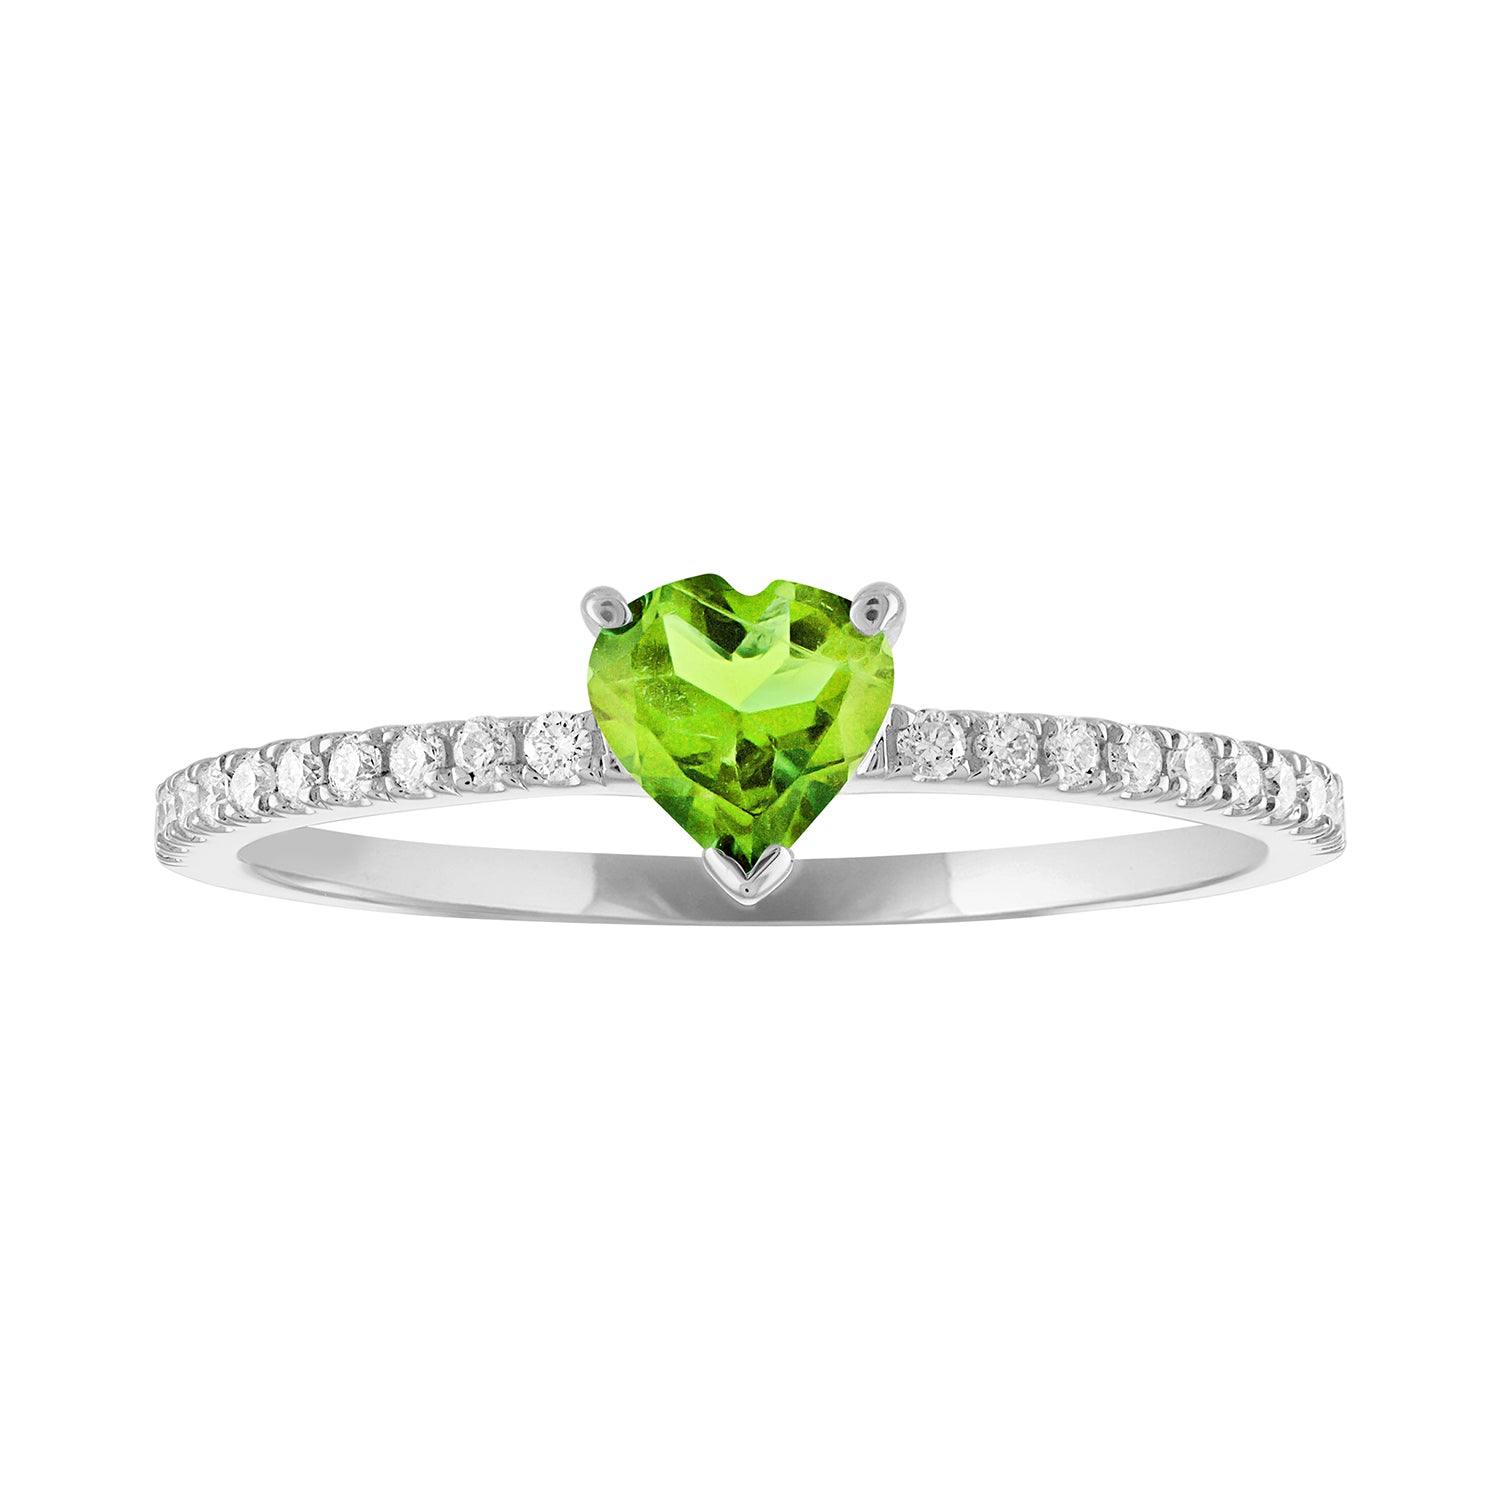 Thin banned white gold ring with heart shaped peridot and round diamonds on the shank